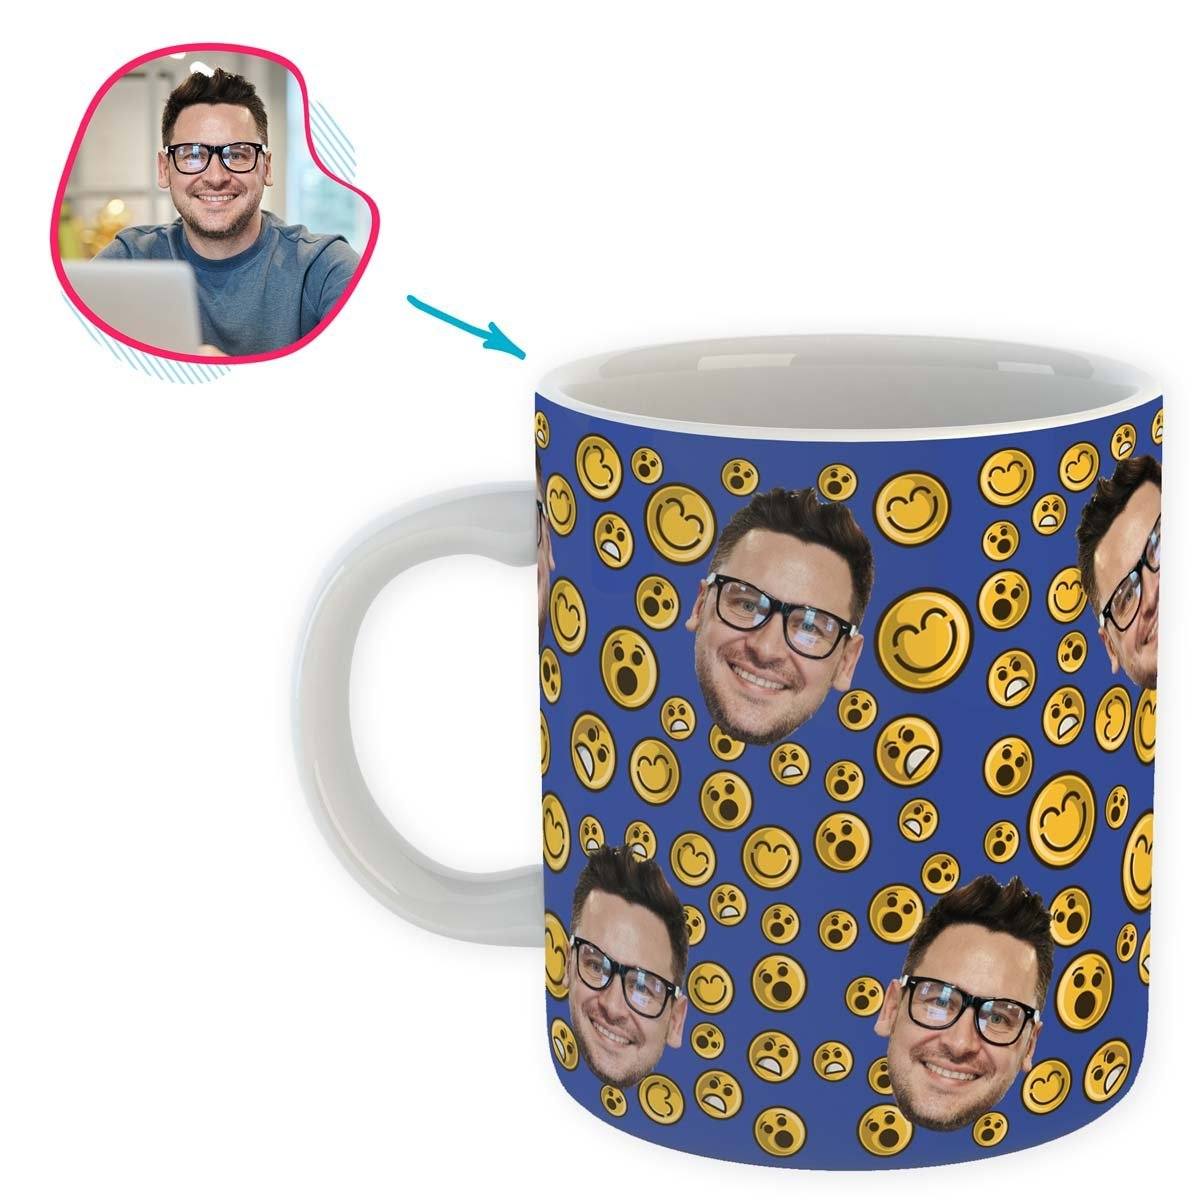 darkblue Smiles mug personalized with photo of face printed on it